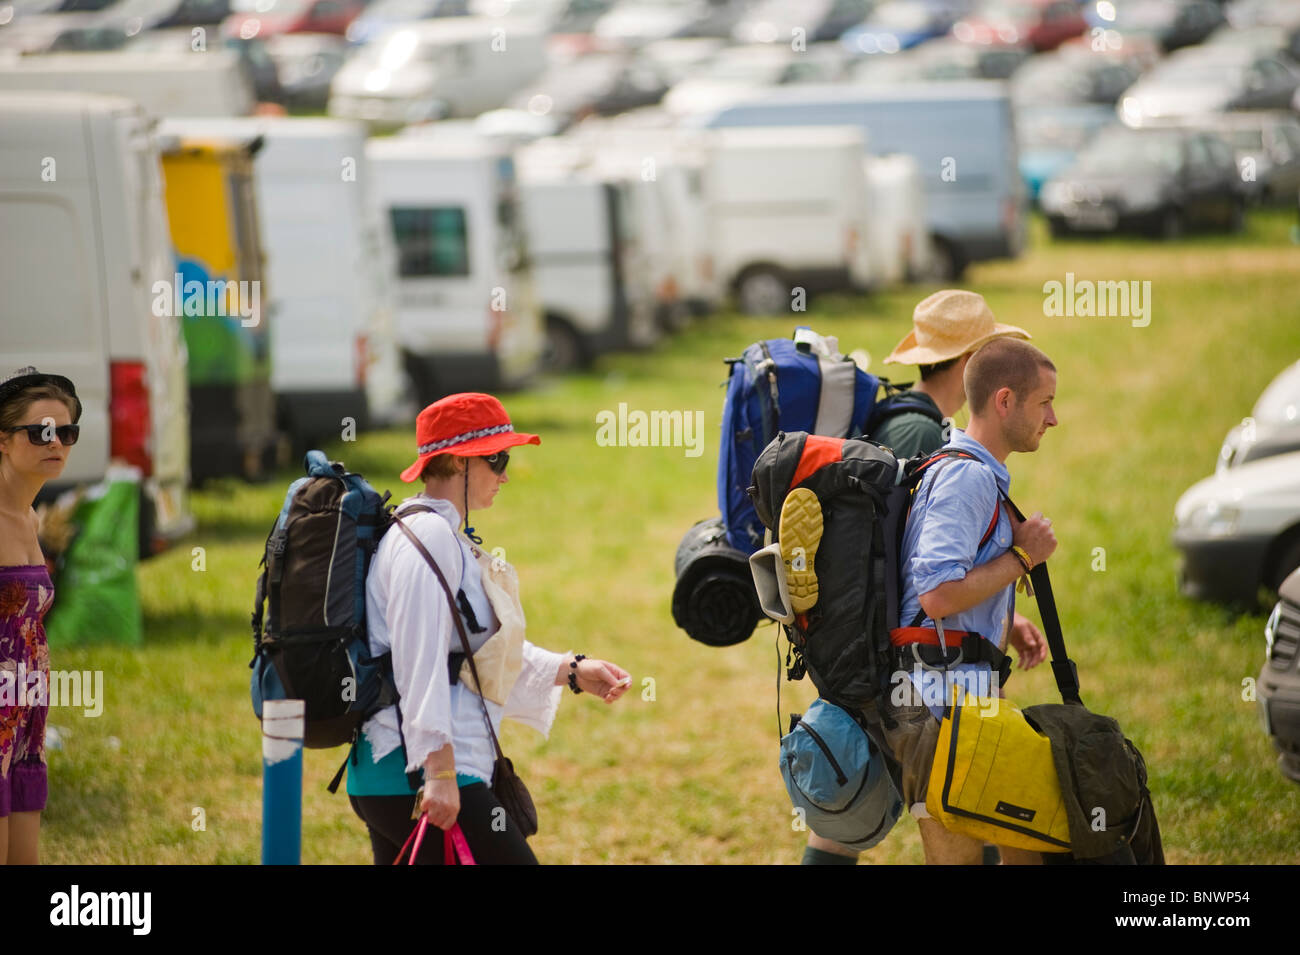 People leaving the Glastonbury Festival at the end of the festival with parked cars and vans in the background. Stock Photo